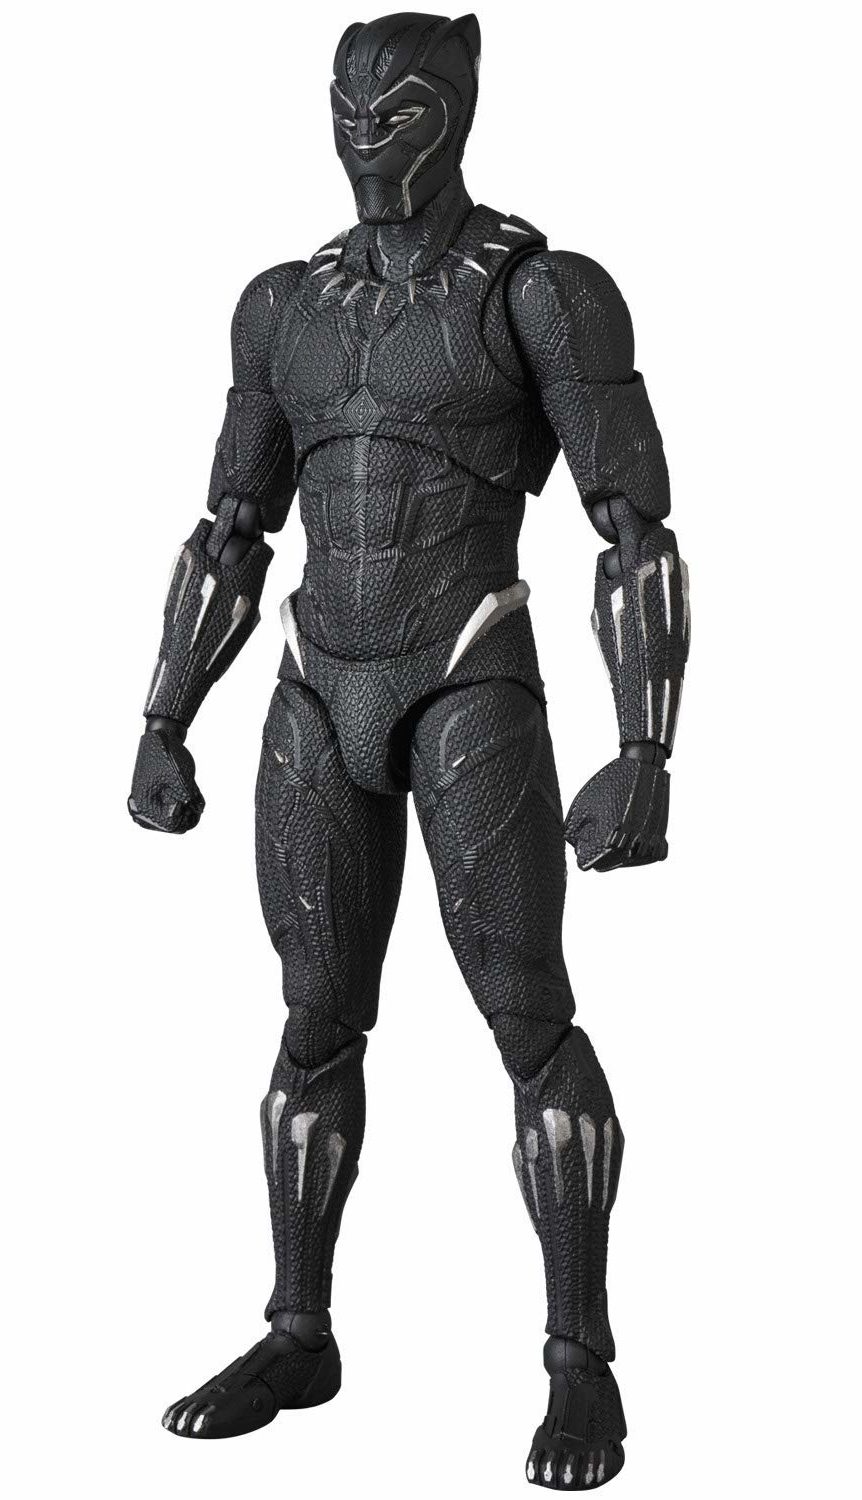 black panther figure 6 inch